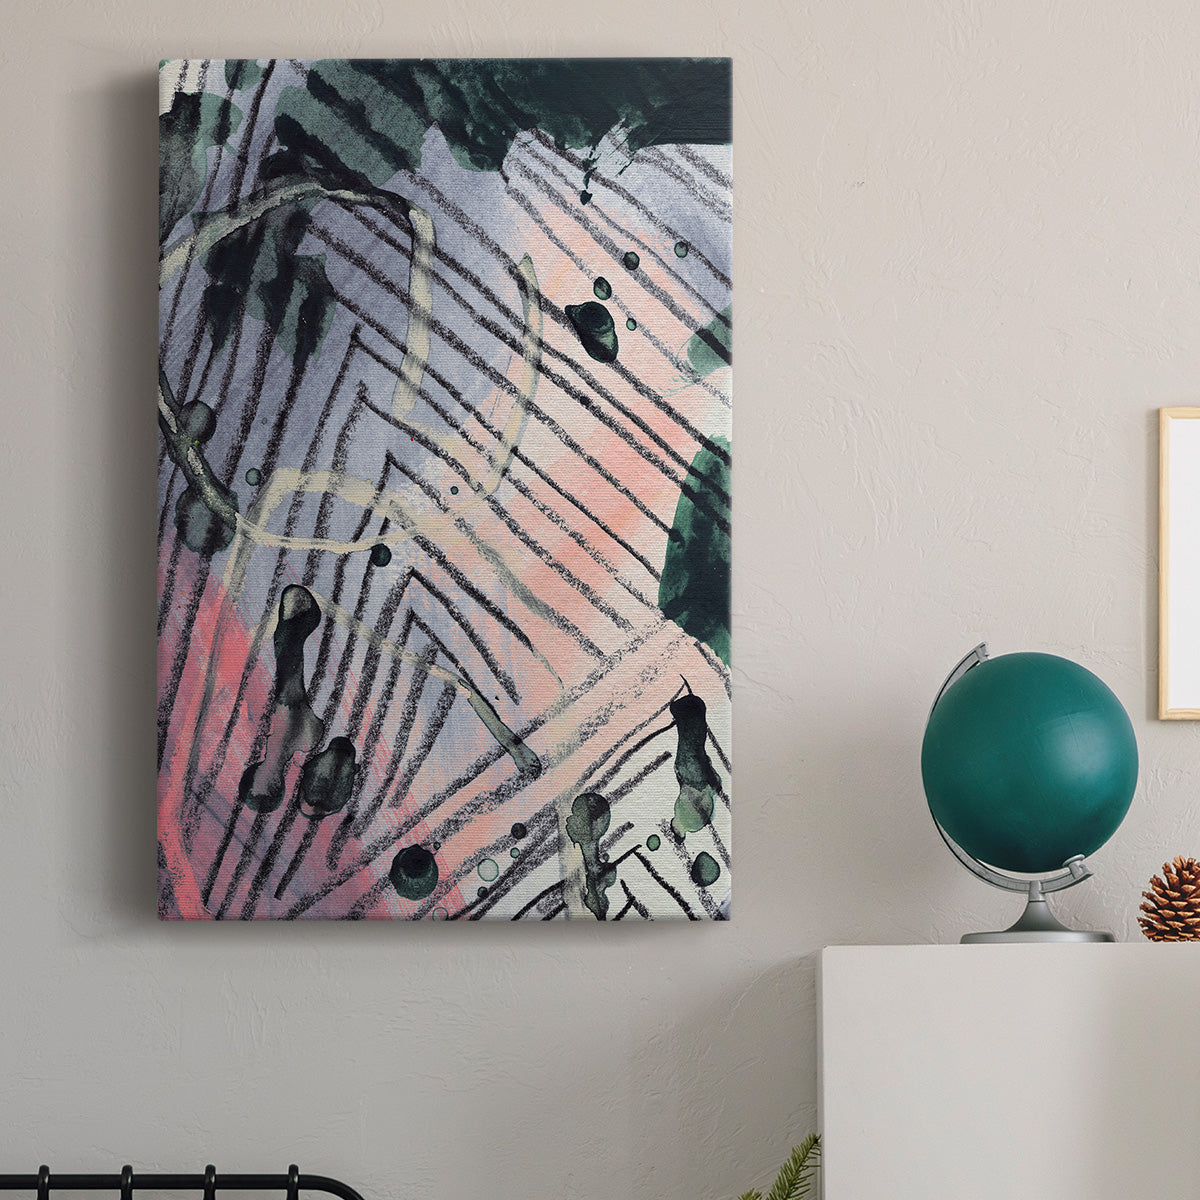 Angled Spaces IV Premium Gallery Wrapped Canvas - Ready to Hang